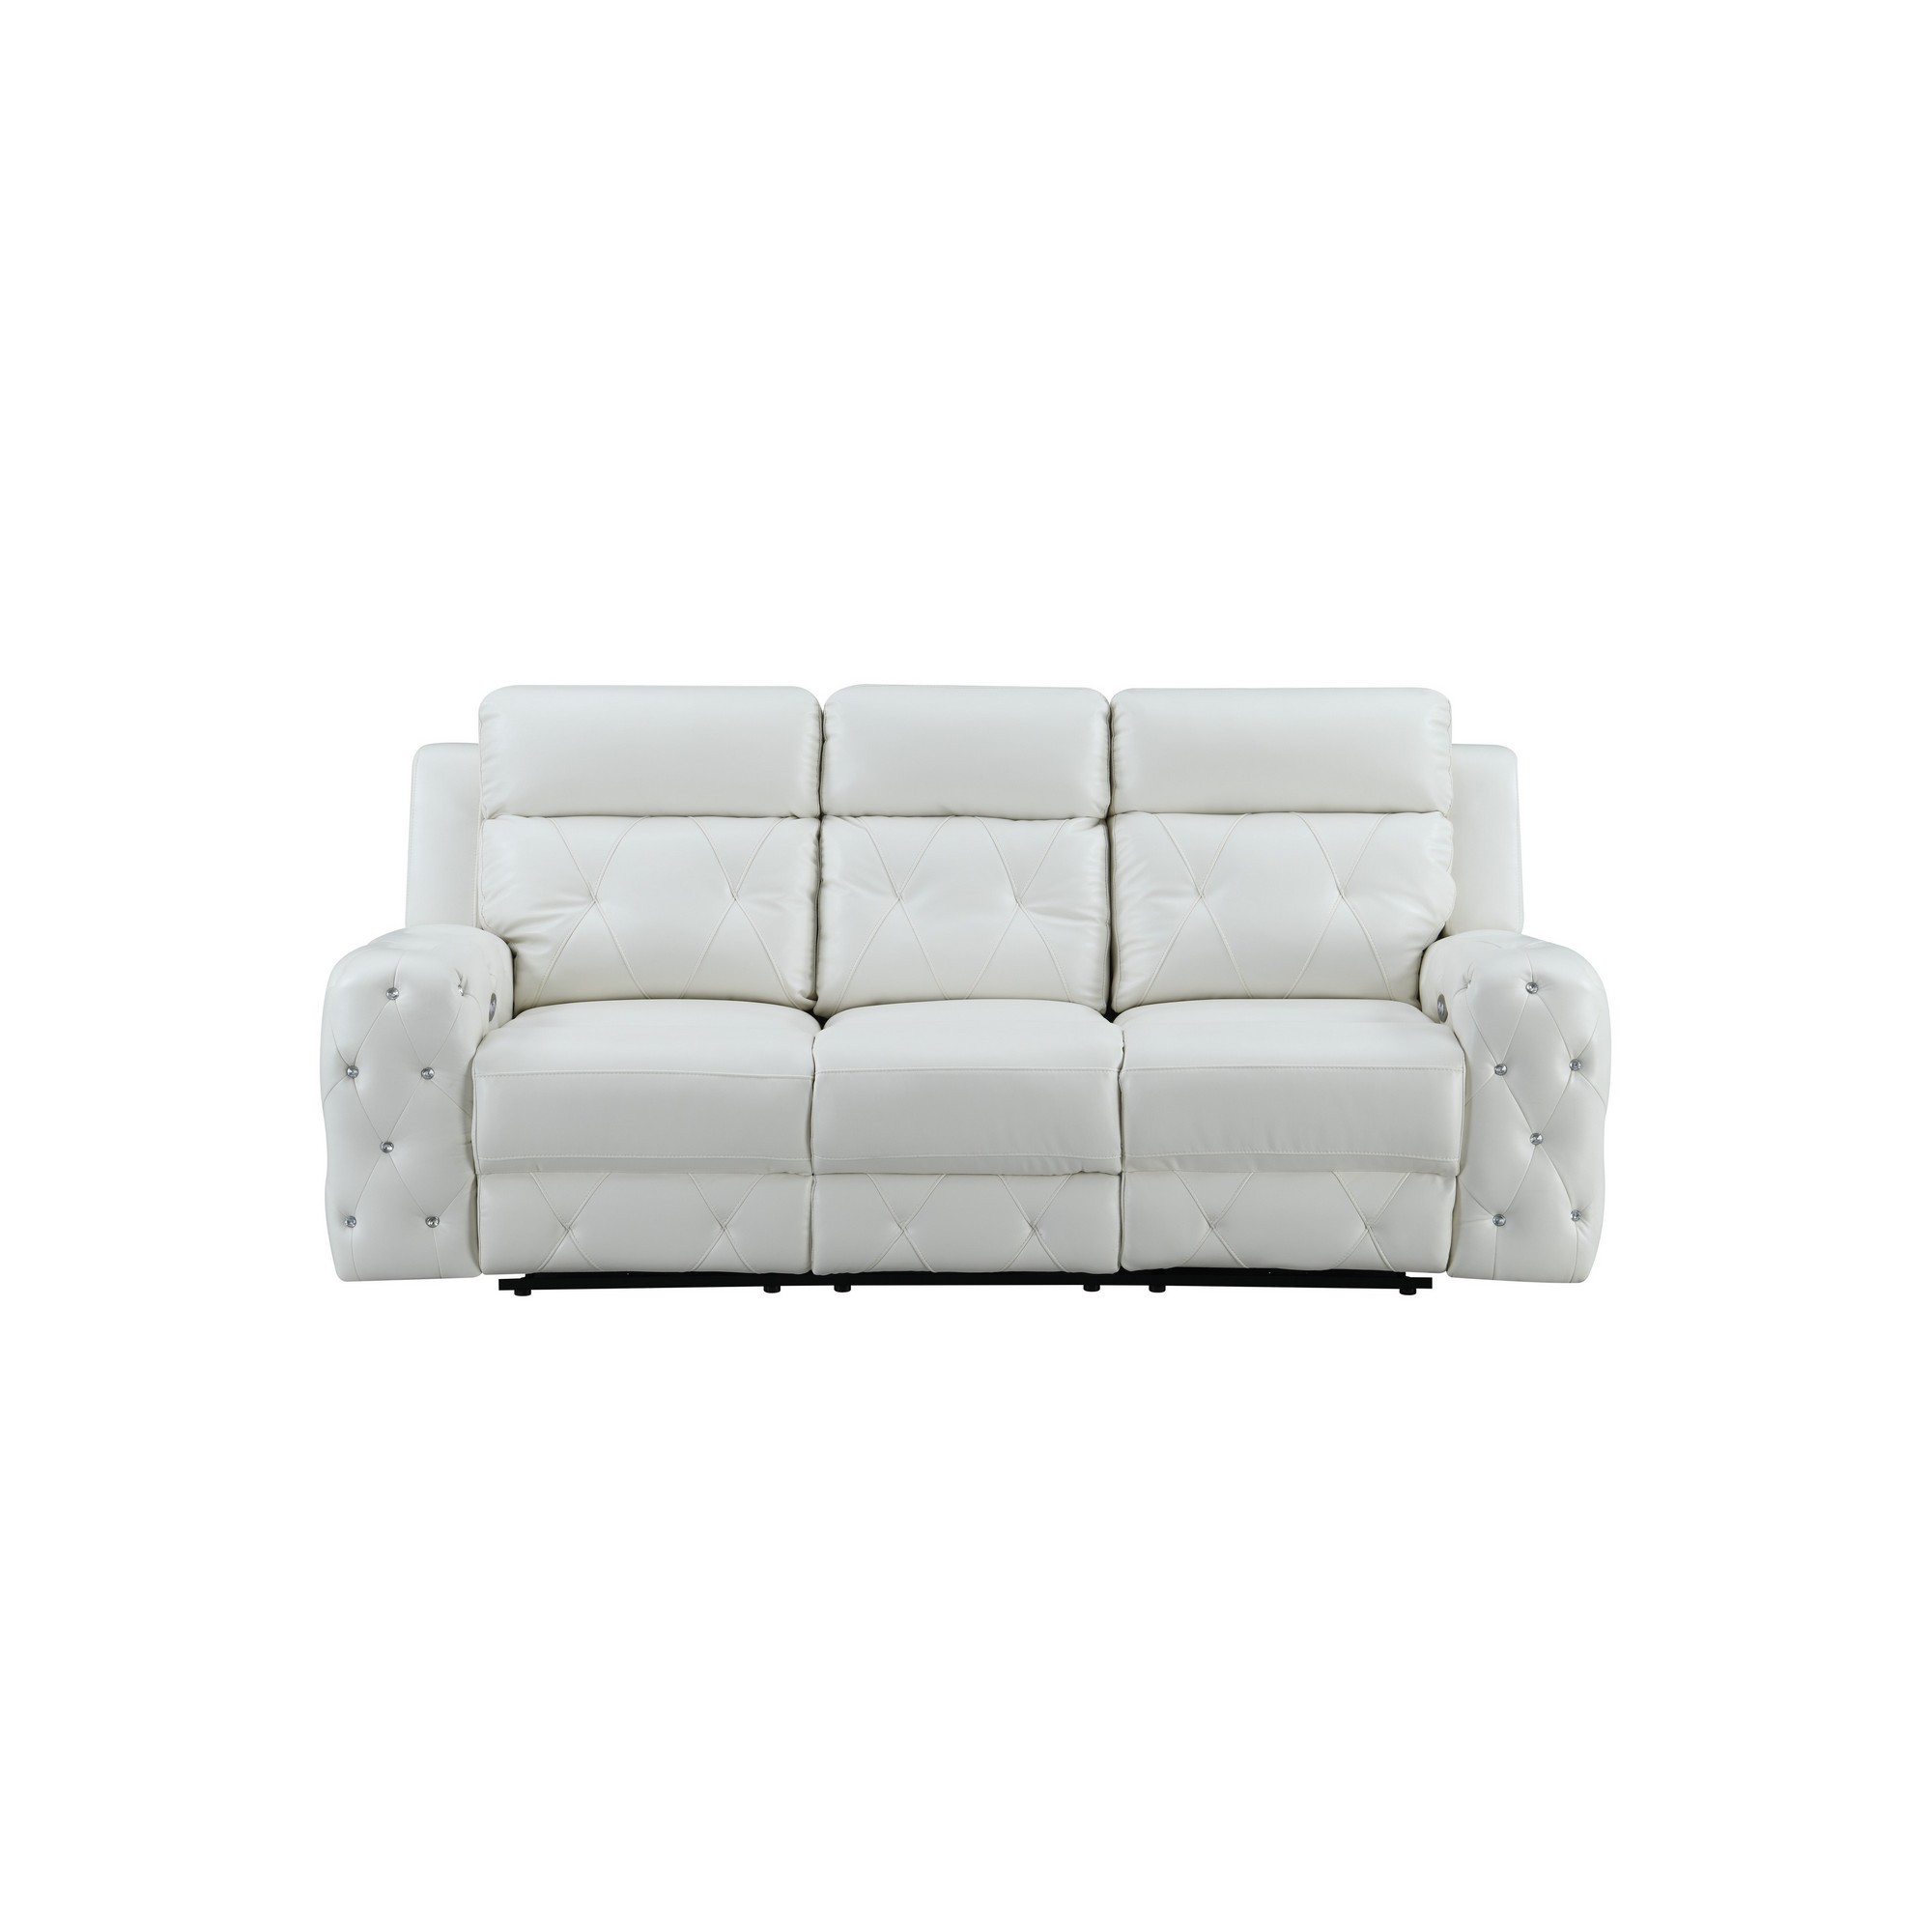 White Leather Gel Cover Power Reclining Sofa In Plushily Padded Seats Jewel Embellished Tufted Design Along With Recessed Arm